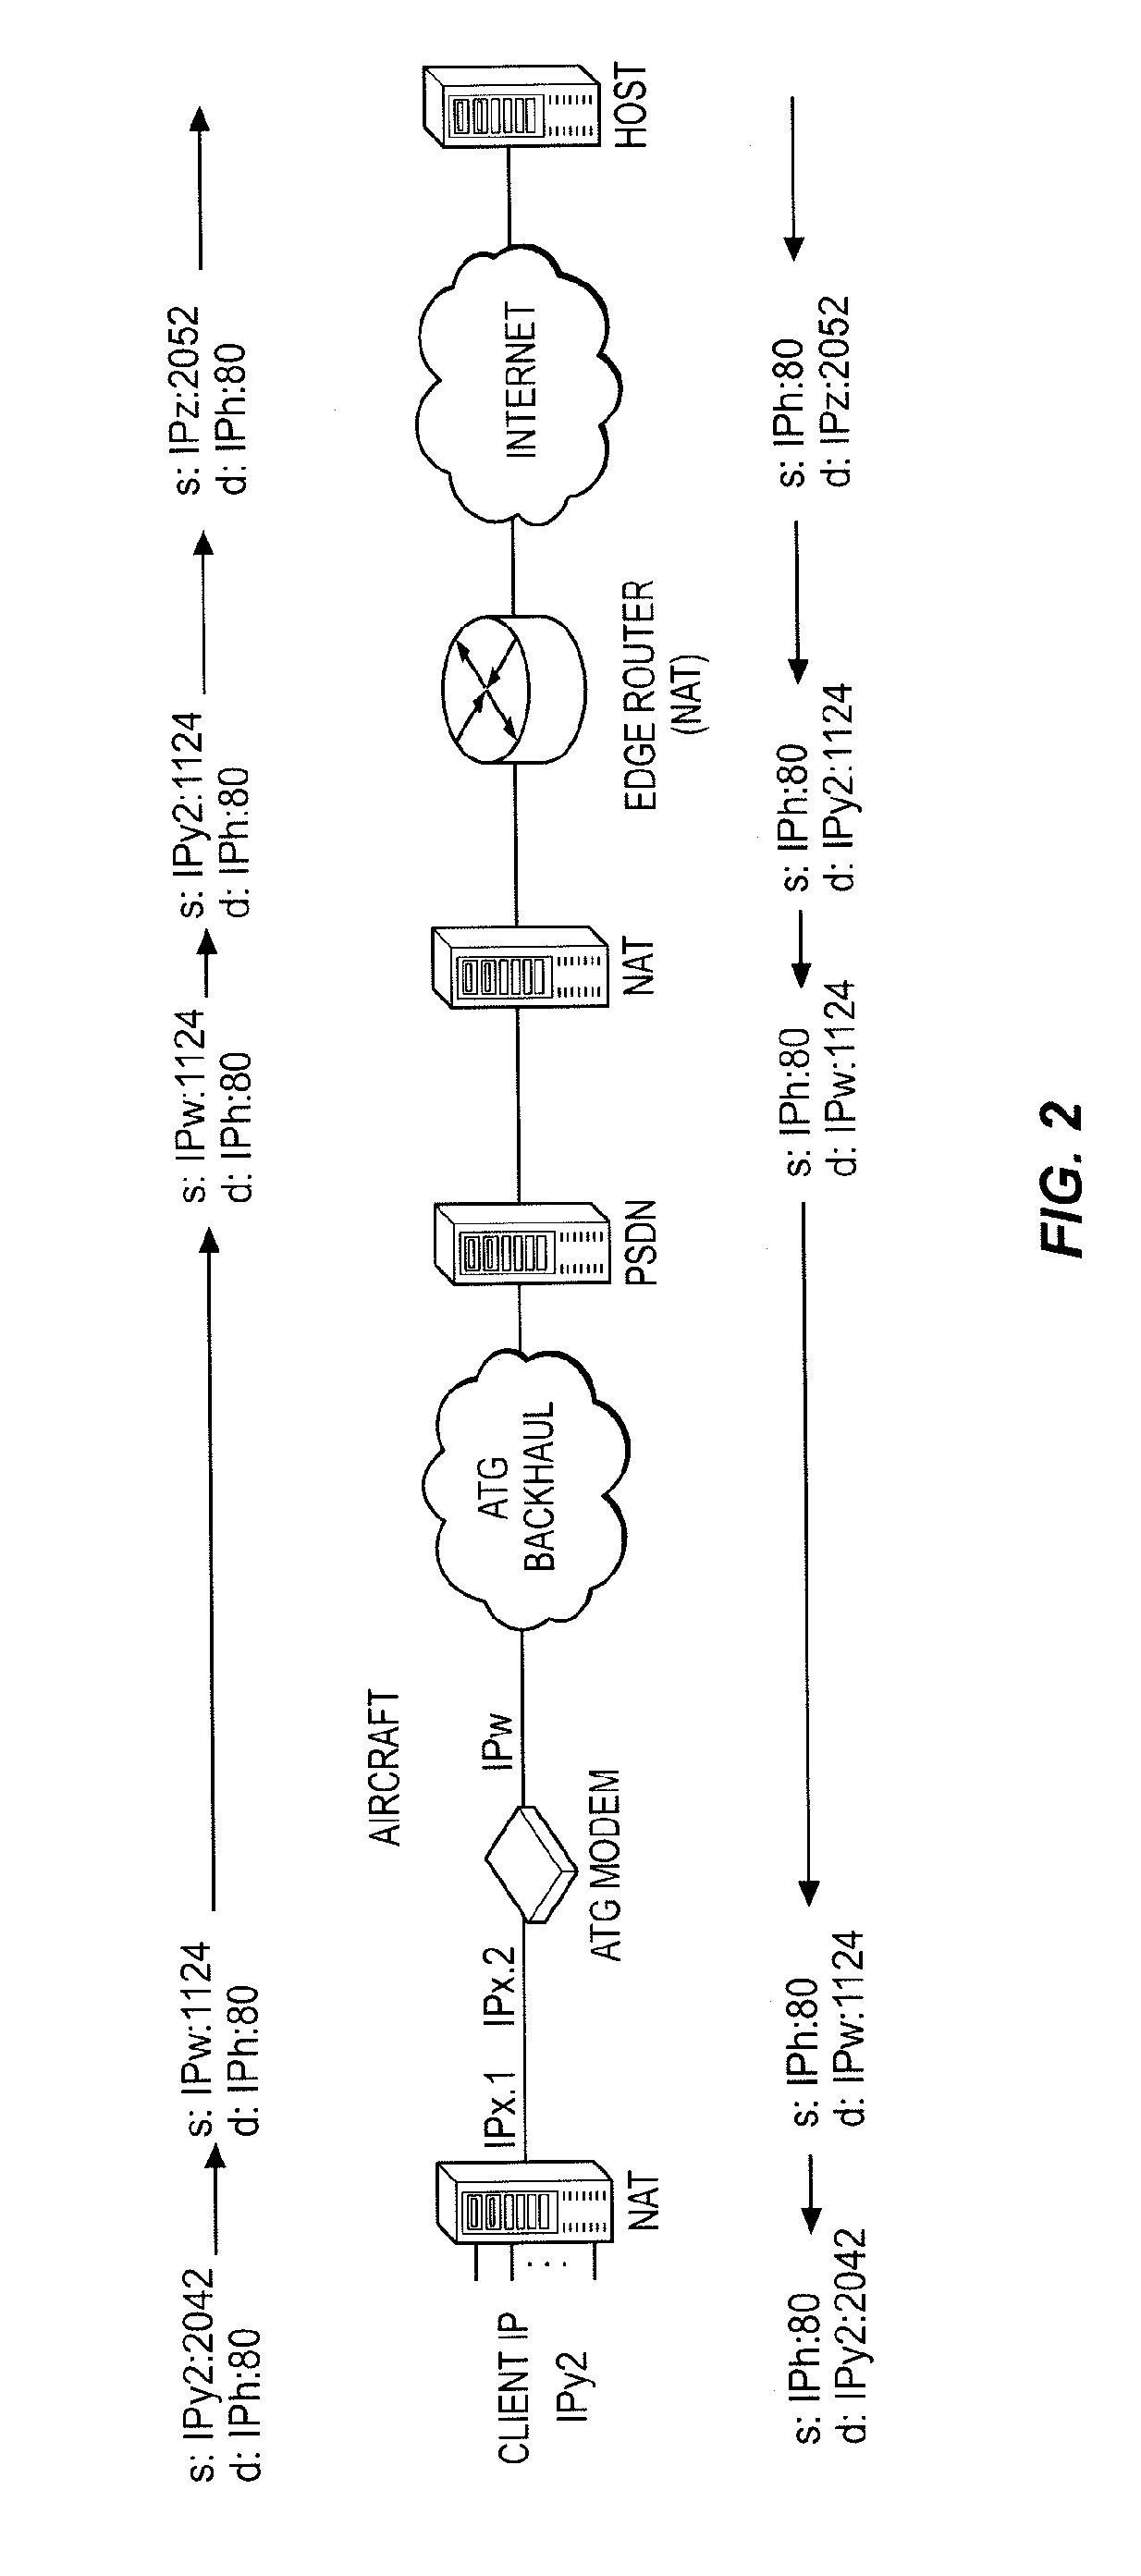 Differentiated Services Code Point Mirroring For Wireless Communications